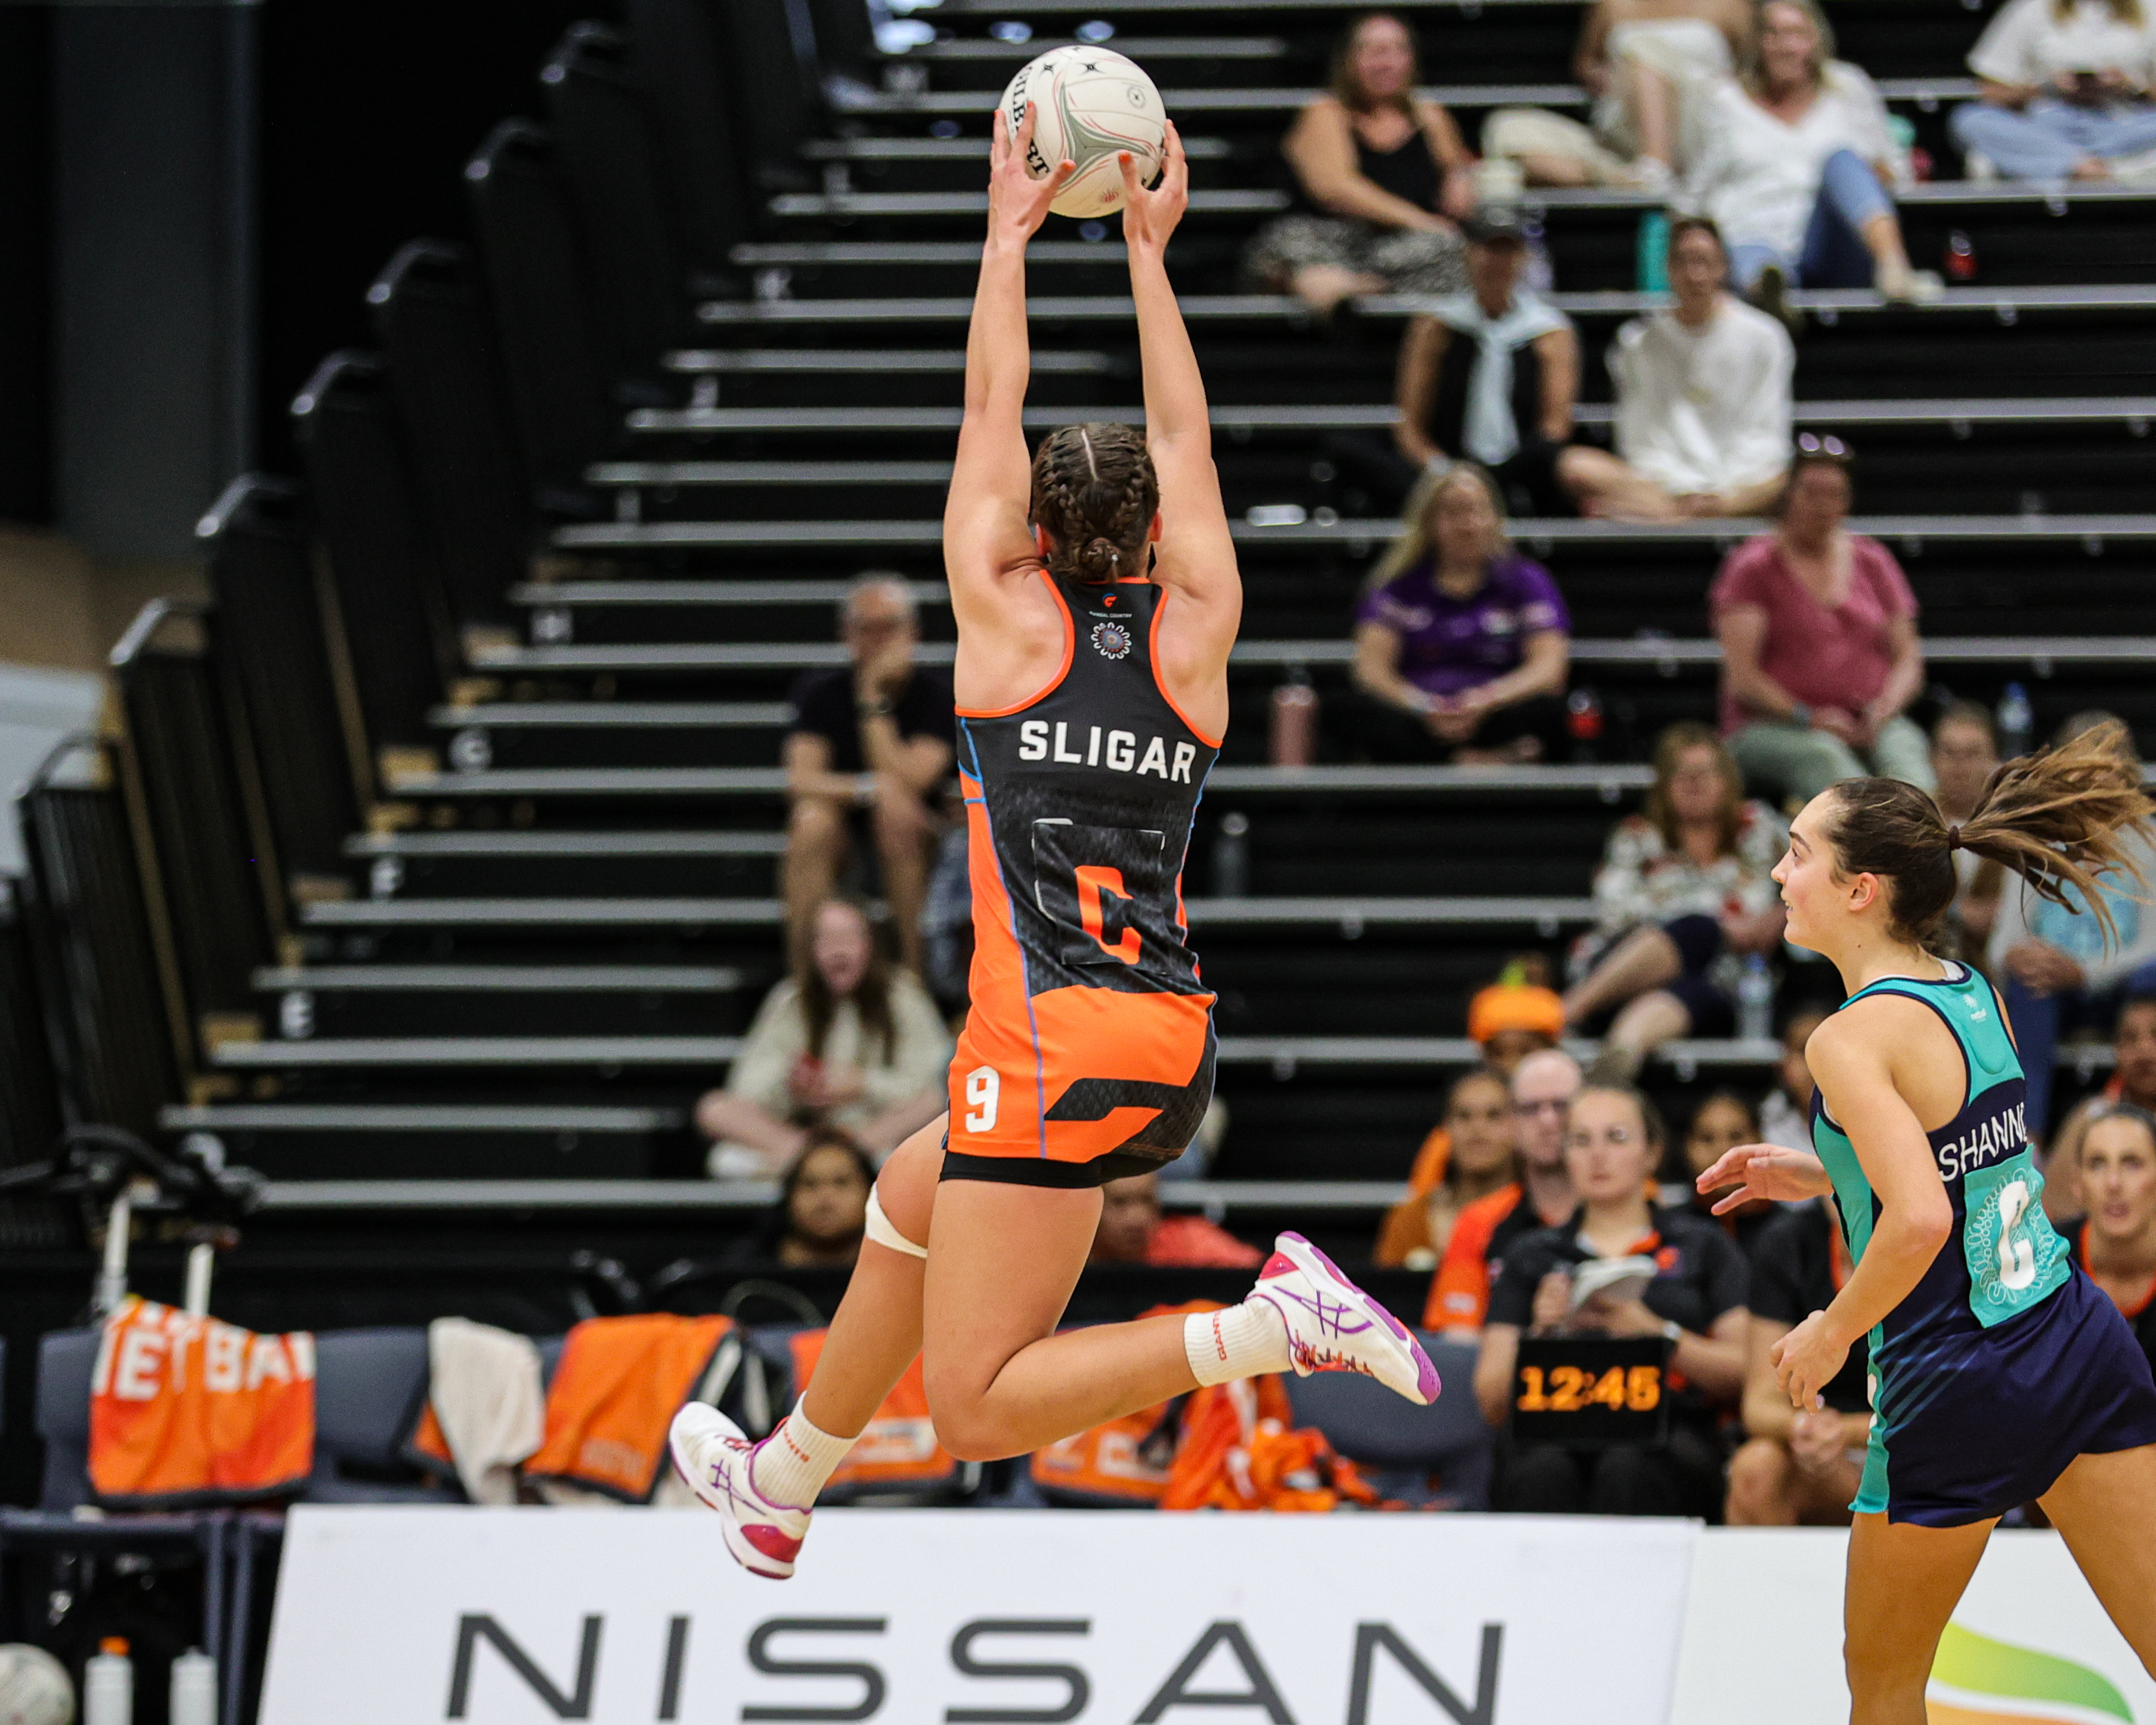 Amy Sligar impressed at the 2023 edition of the Australian Netball Championships.